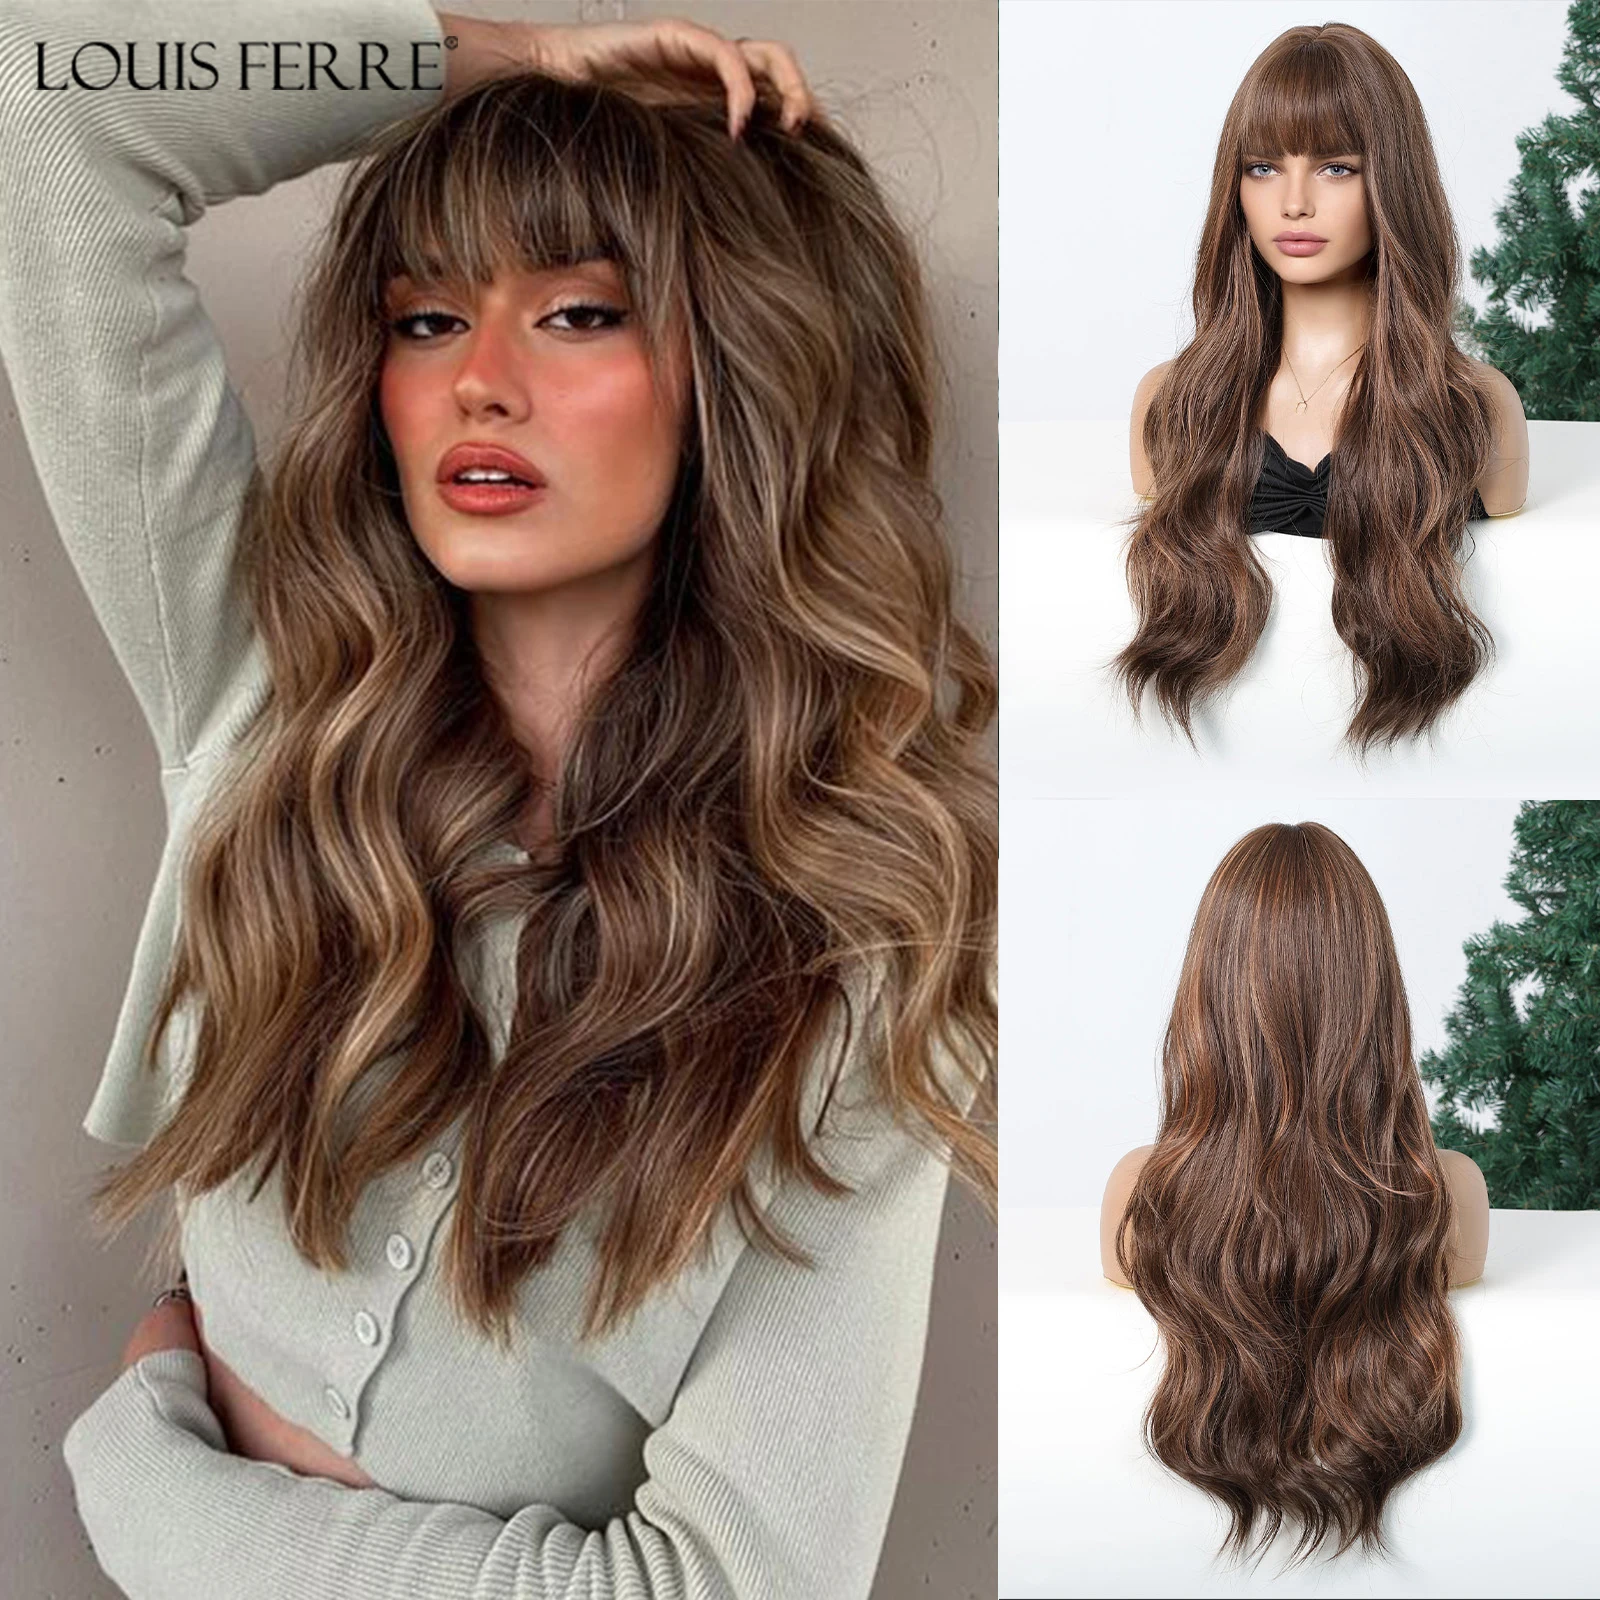 

LOUIS FERRE Brown Highlights Wavy Wig With Bangs Long Curly Natural Hair for Women Girls Daily Use Heat Resistant Fiber Wigs